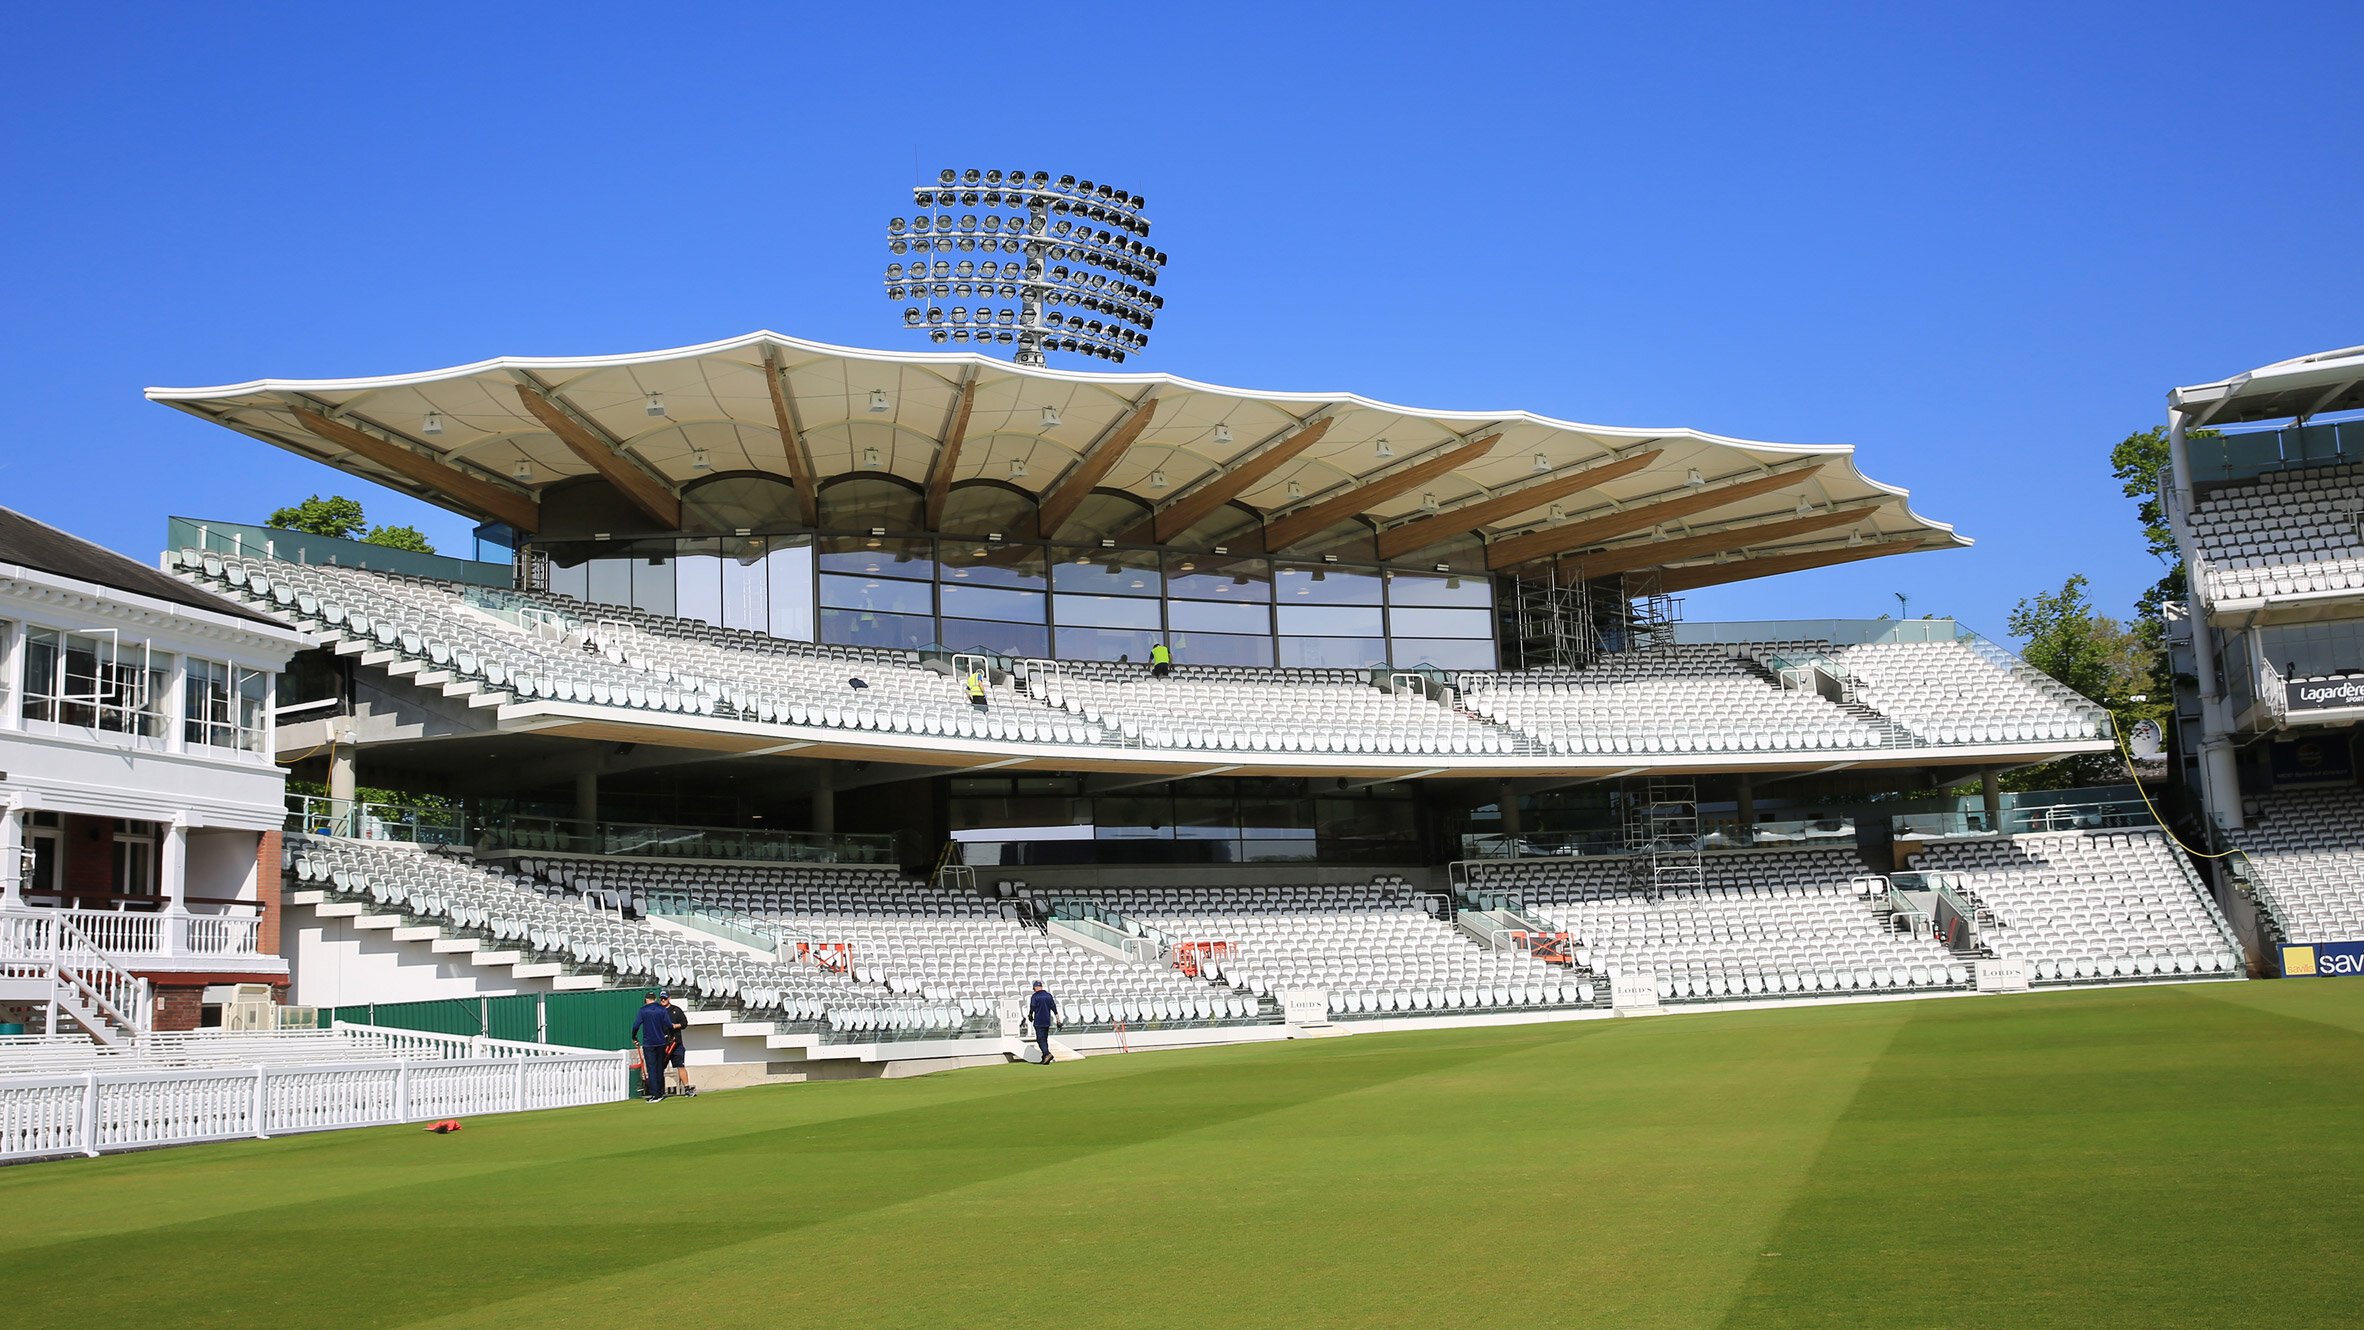 lords-warner-stand-populous-architecture-public-and-leisure-sports-london_dezeen_2364_col_5.jpg